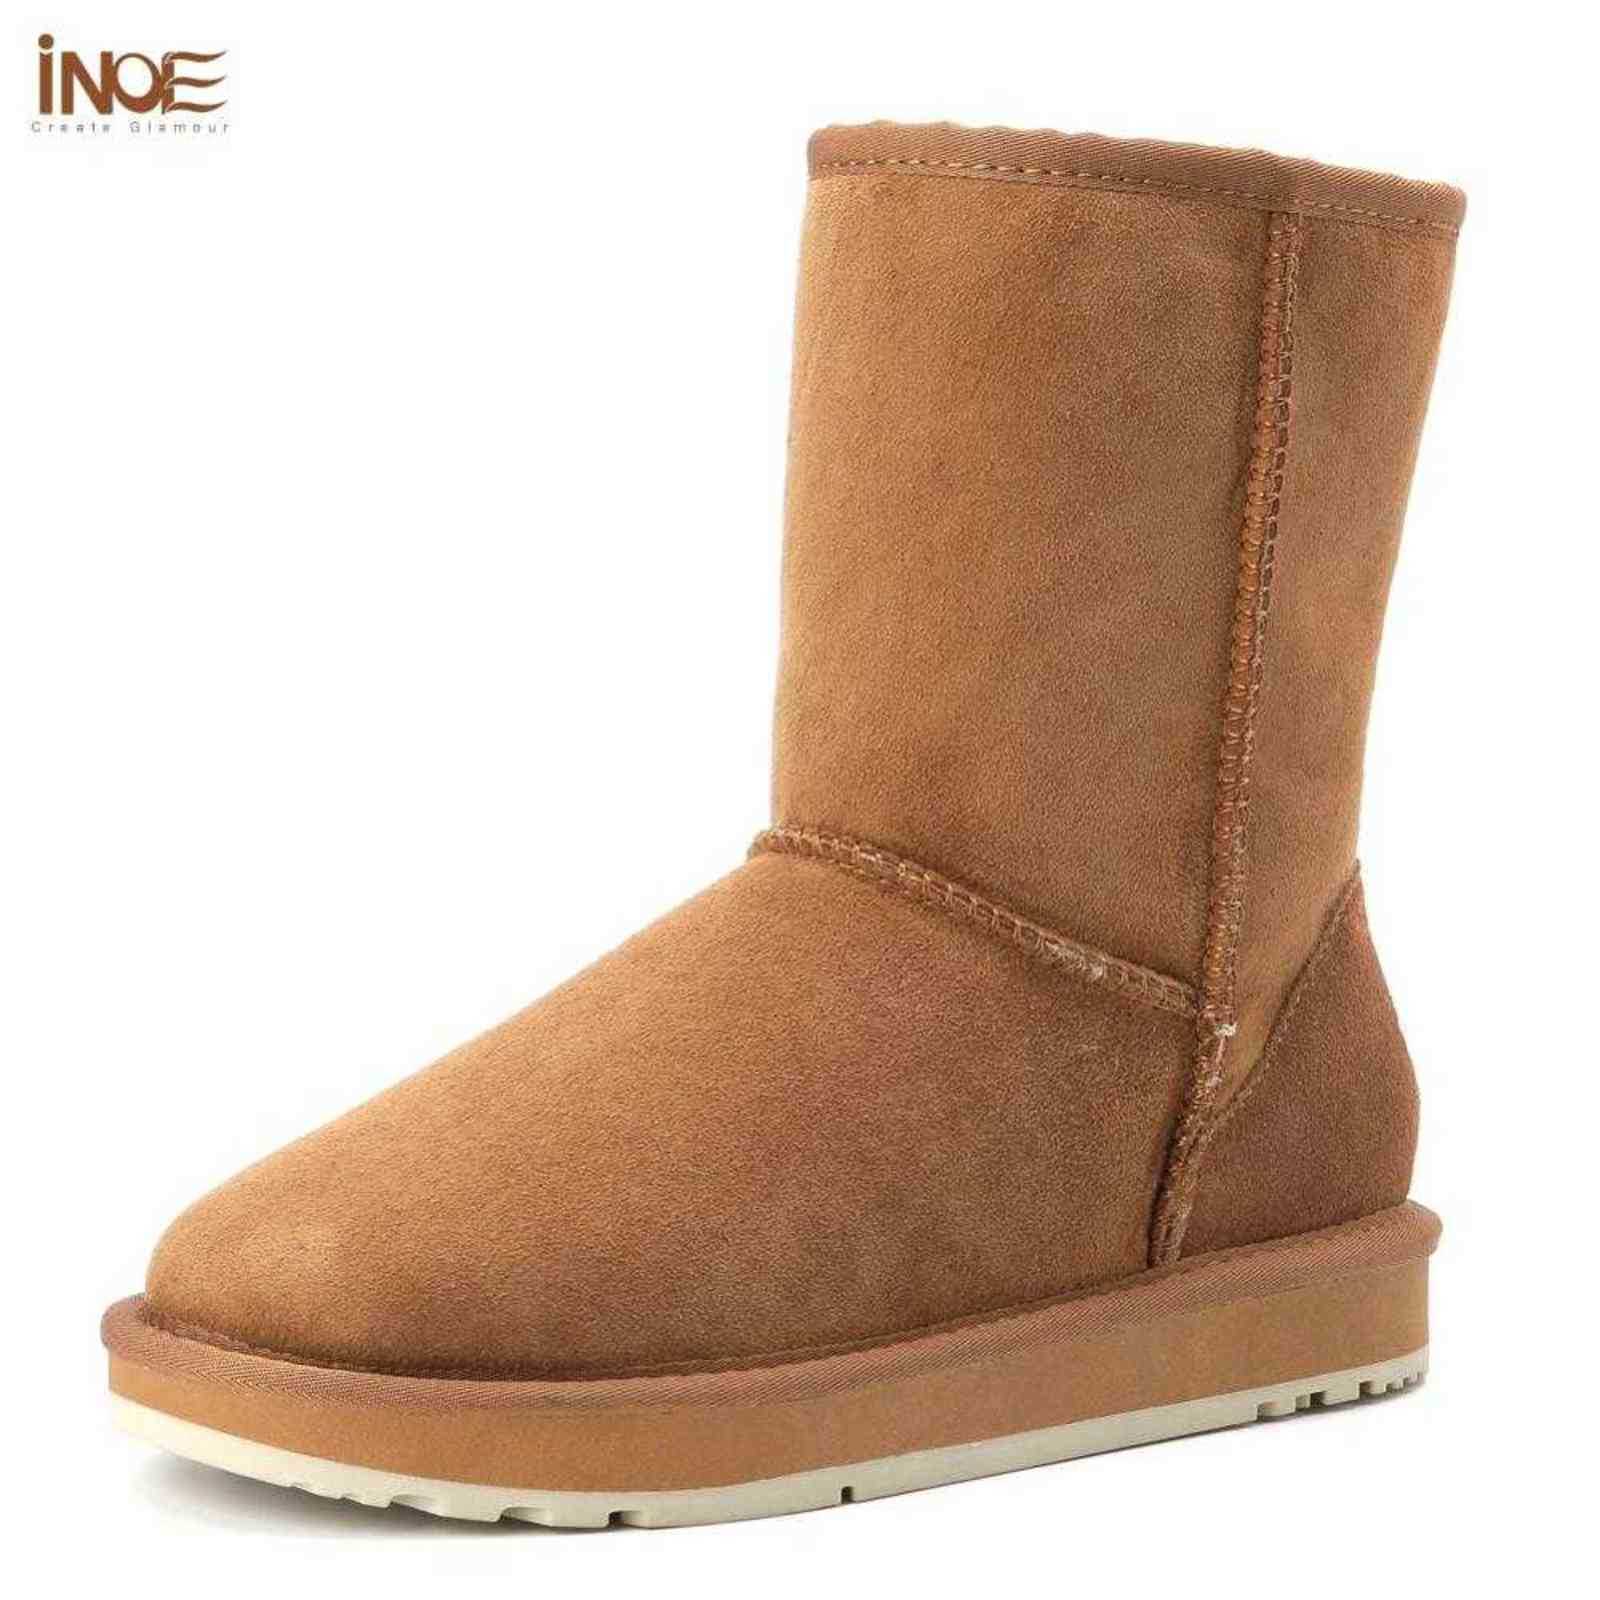 

ugglies boots Snow Boots Warm Shoes Real Sheepskin Suede Leather Woman Casual High Winter For Women Sheep Wool Fur Lined Waterproof H1102 6K32, No shoes